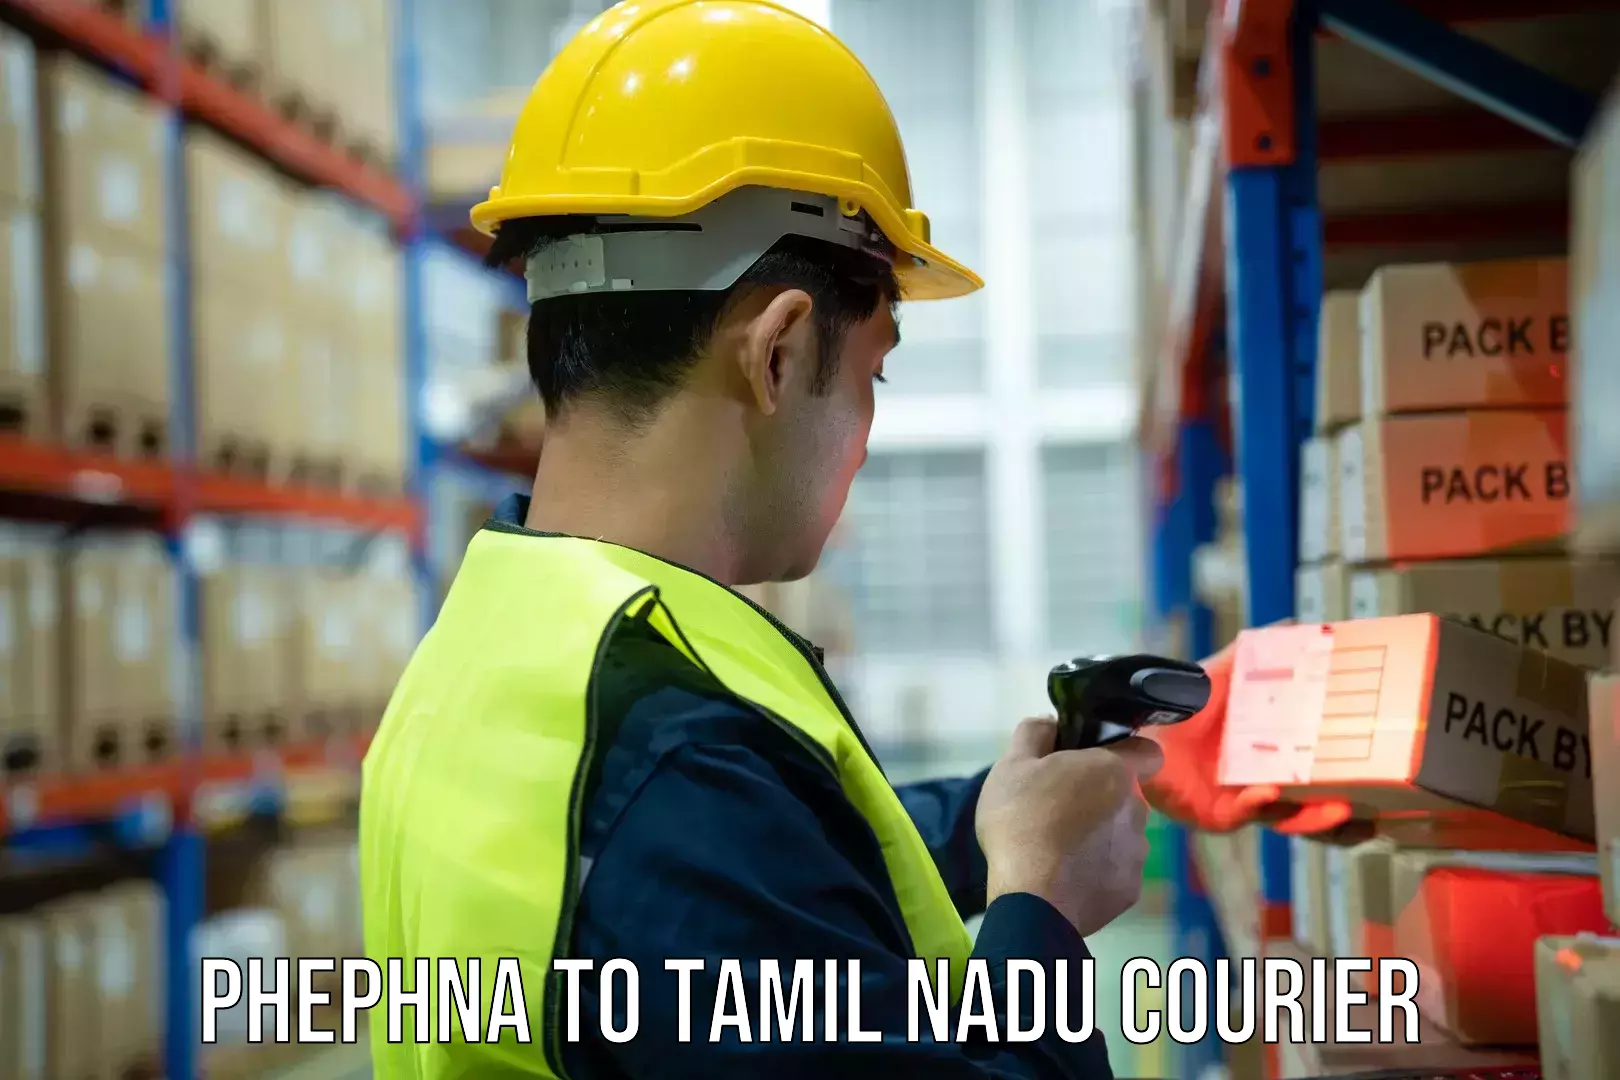 Courier service efficiency Phephna to Ennore Port Chennai